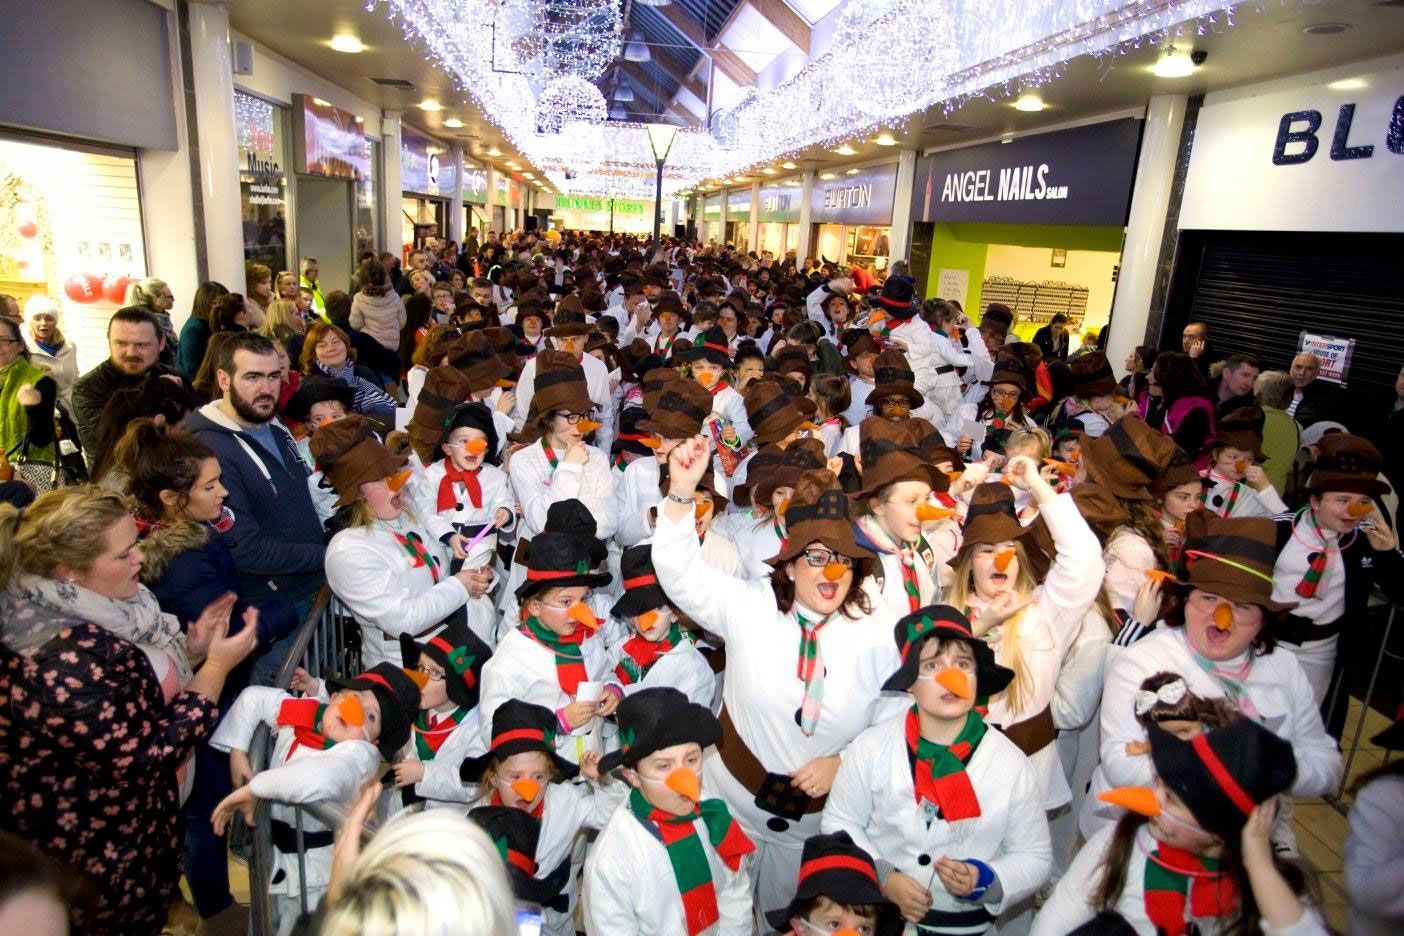  Largest gathering of people dressed as snowmen: Newry breaks Guinness world record (VIDEO)